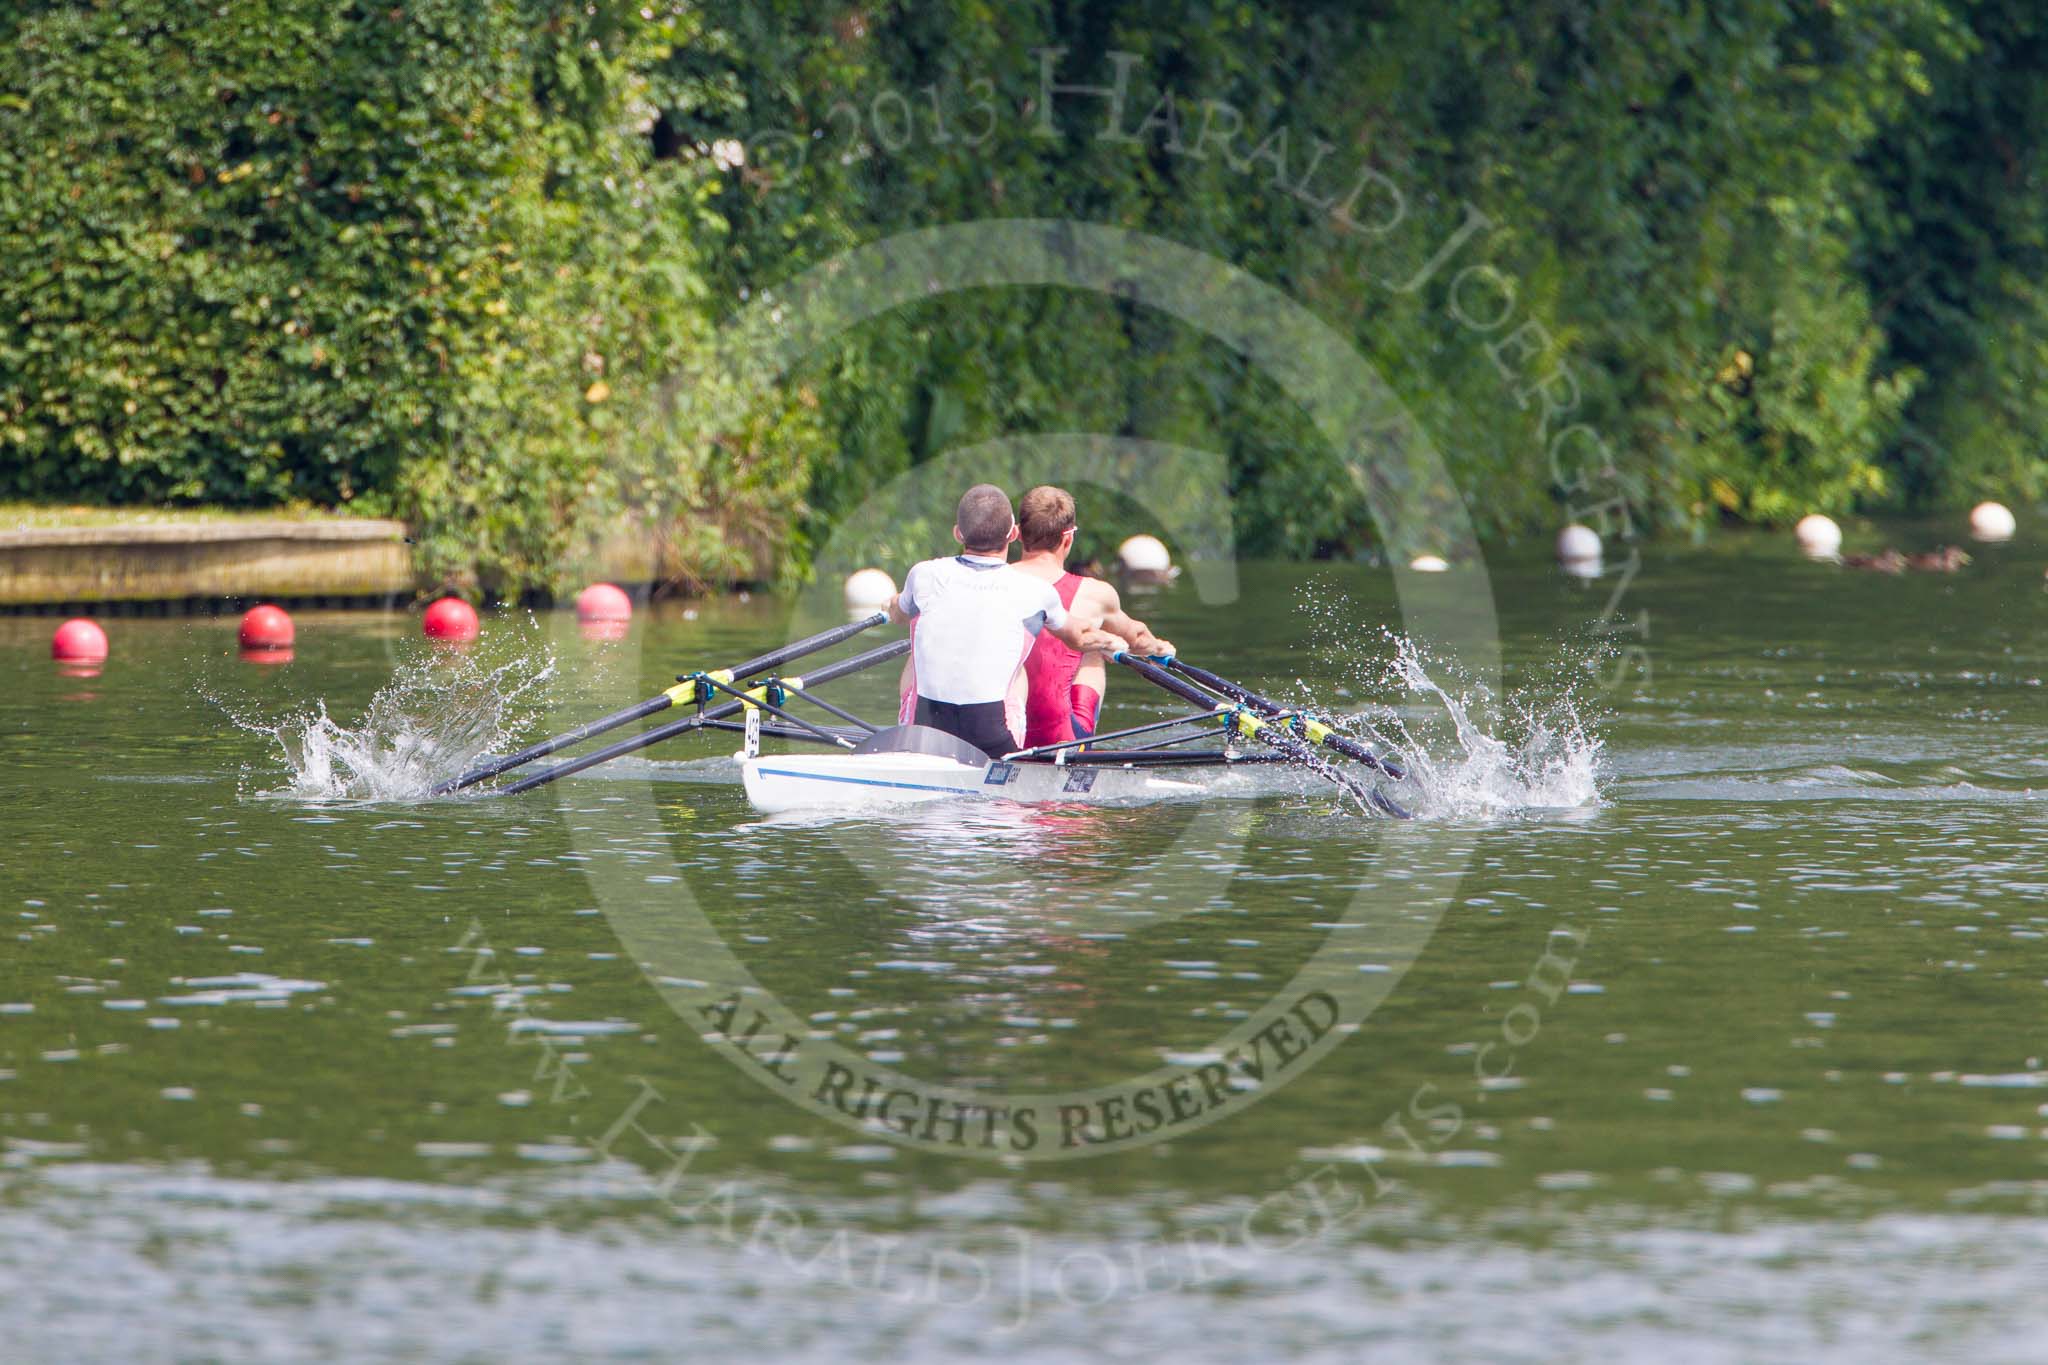 Henley Royal Regatta 2013, Saturday: Race No. 13 for the Double Sculls Challenge Cup, Oxford Brookes University and Leander Club (white boat) v London Rowing Club and Leander Club (yellow boat). Image #257, 06 July 2013 12:02 River Thames, Henley on Thames, UK